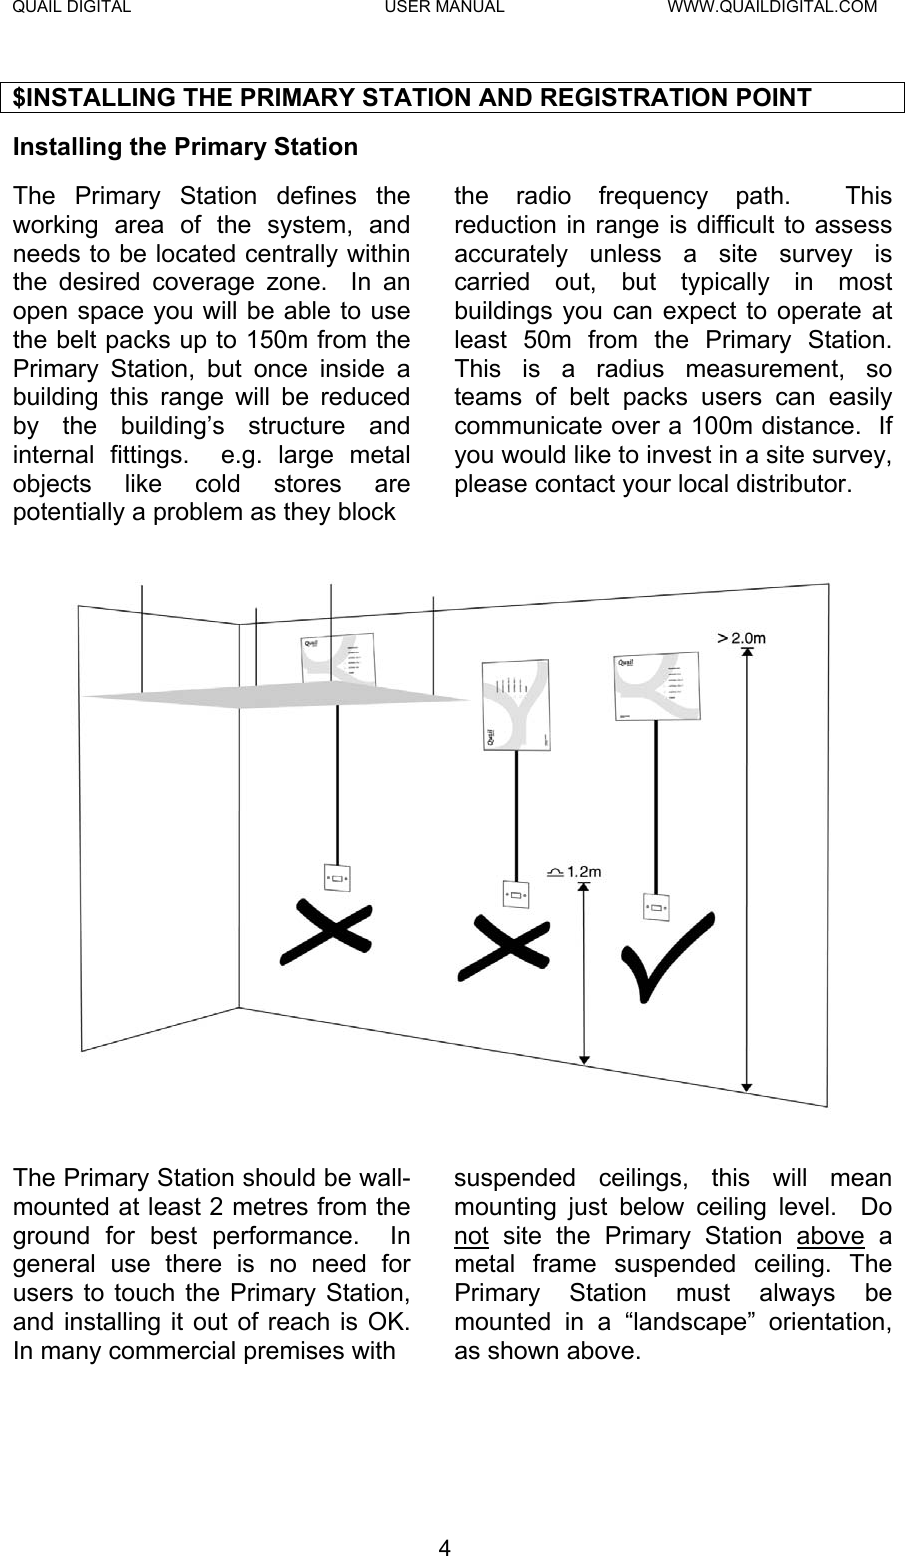 QUAIL DIGITAL  USER MANUAL  WWW.QUAILDIGITAL.COM $INSTALLING THE PRIMARY STATION AND REGISTRATION POINT Installing the Primary Station   The Primary Station defines the working area of the system, and needs to be located centrally within the desired coverage zone.  In an open space you will be able to use the belt packs up to 150m from the Primary Station, but once inside a building this range will be reduced by the building’s structure and internal fittings.  e.g. large metal objects like cold stores are potentially a problem as they block  the radio frequency path.  This reduction in range is difficult to assess accurately unless a site survey is carried out, but typically in most buildings you can expect to operate at least 50m from the Primary Station.  This is a radius measurement, so teams of belt packs users can easily communicate over a 100m distance.  If you would like to invest in a site survey, please contact your local distributor.  The Primary Station should be wall-mounted at least 2 metres from the ground for best performance.  In general use there is no need for users to touch the Primary Station, and installing it out of reach is OK.  In many commercial premises with  suspended ceilings, this will mean mounting just below ceiling level.  Do not site the Primary Station above a metal frame suspended ceiling. The Primary Station must always be mounted in a “landscape” orientation, as shown above. 4  